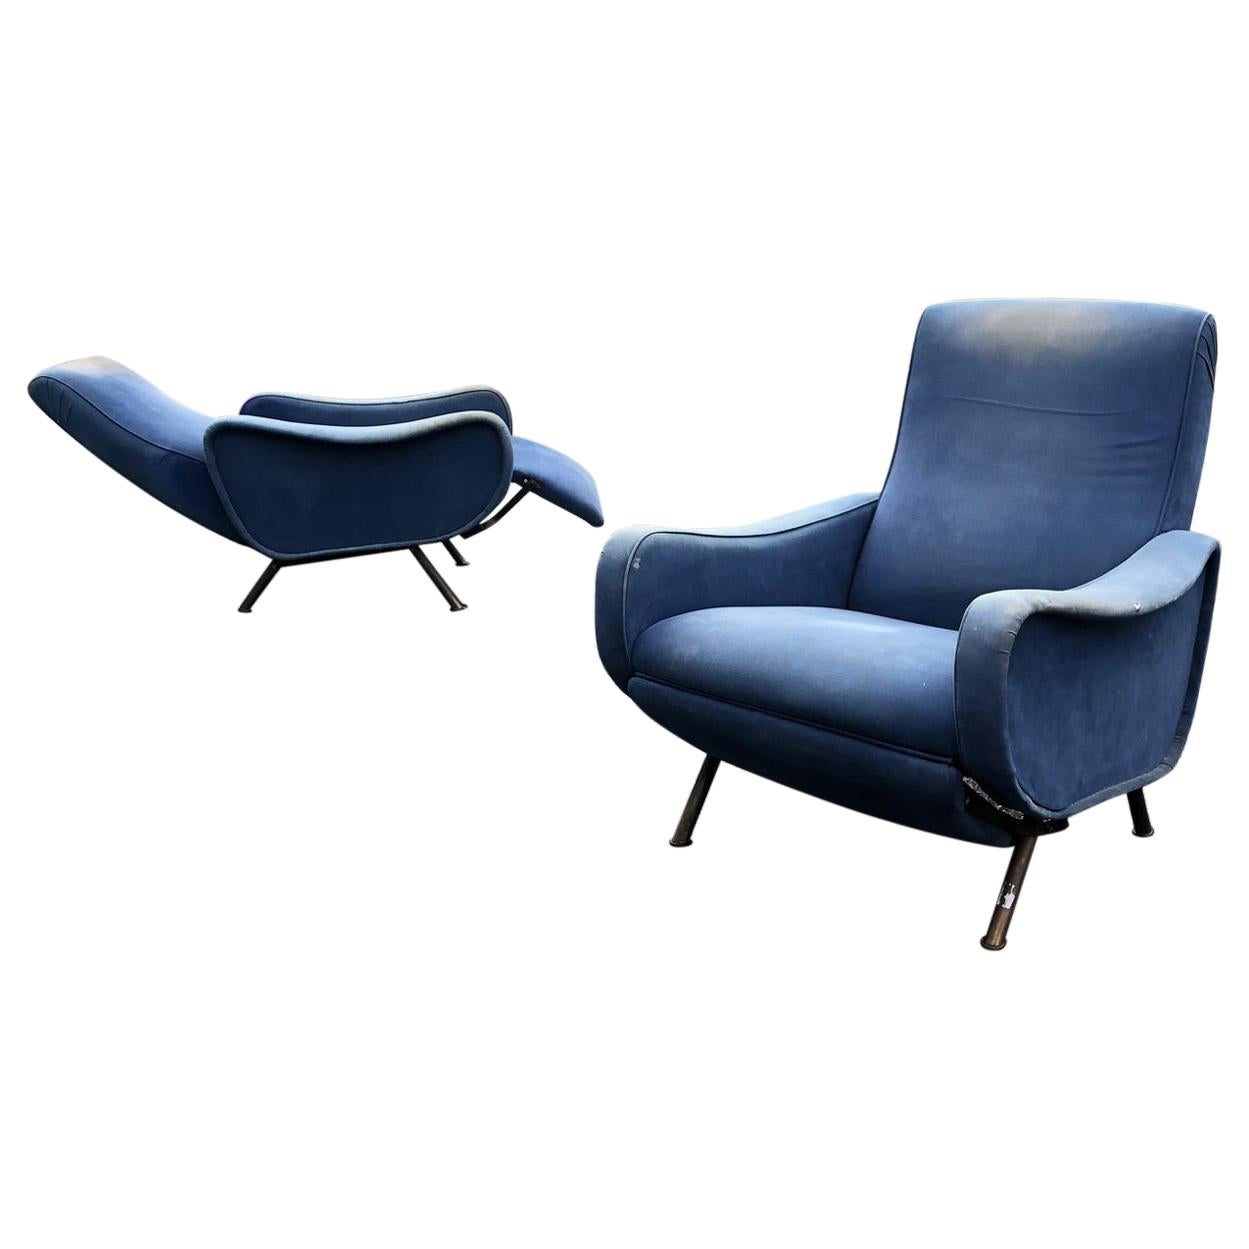 Rare Marco Zanuso Reclining Lady Chairs, Italy, 1960s, reupholstered in COM